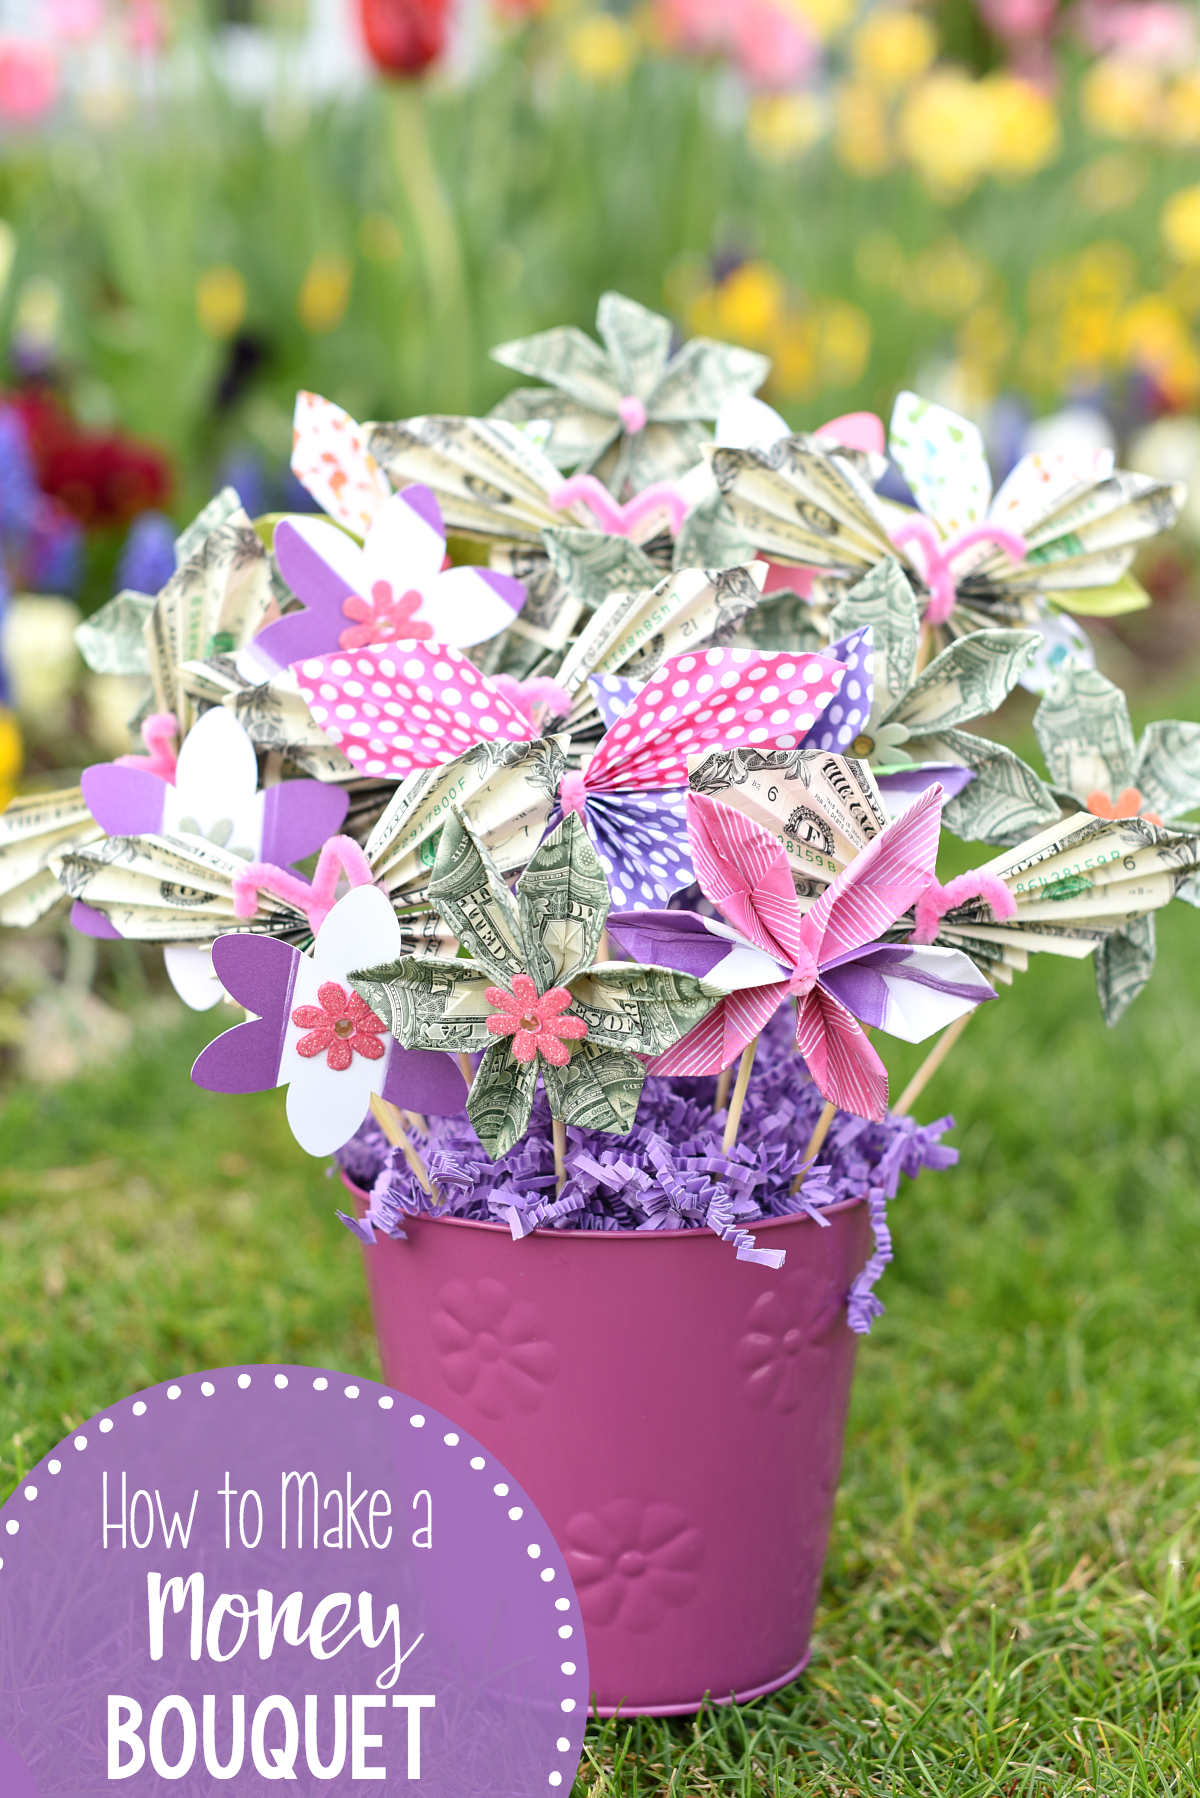 How to Make a Money Bouquet